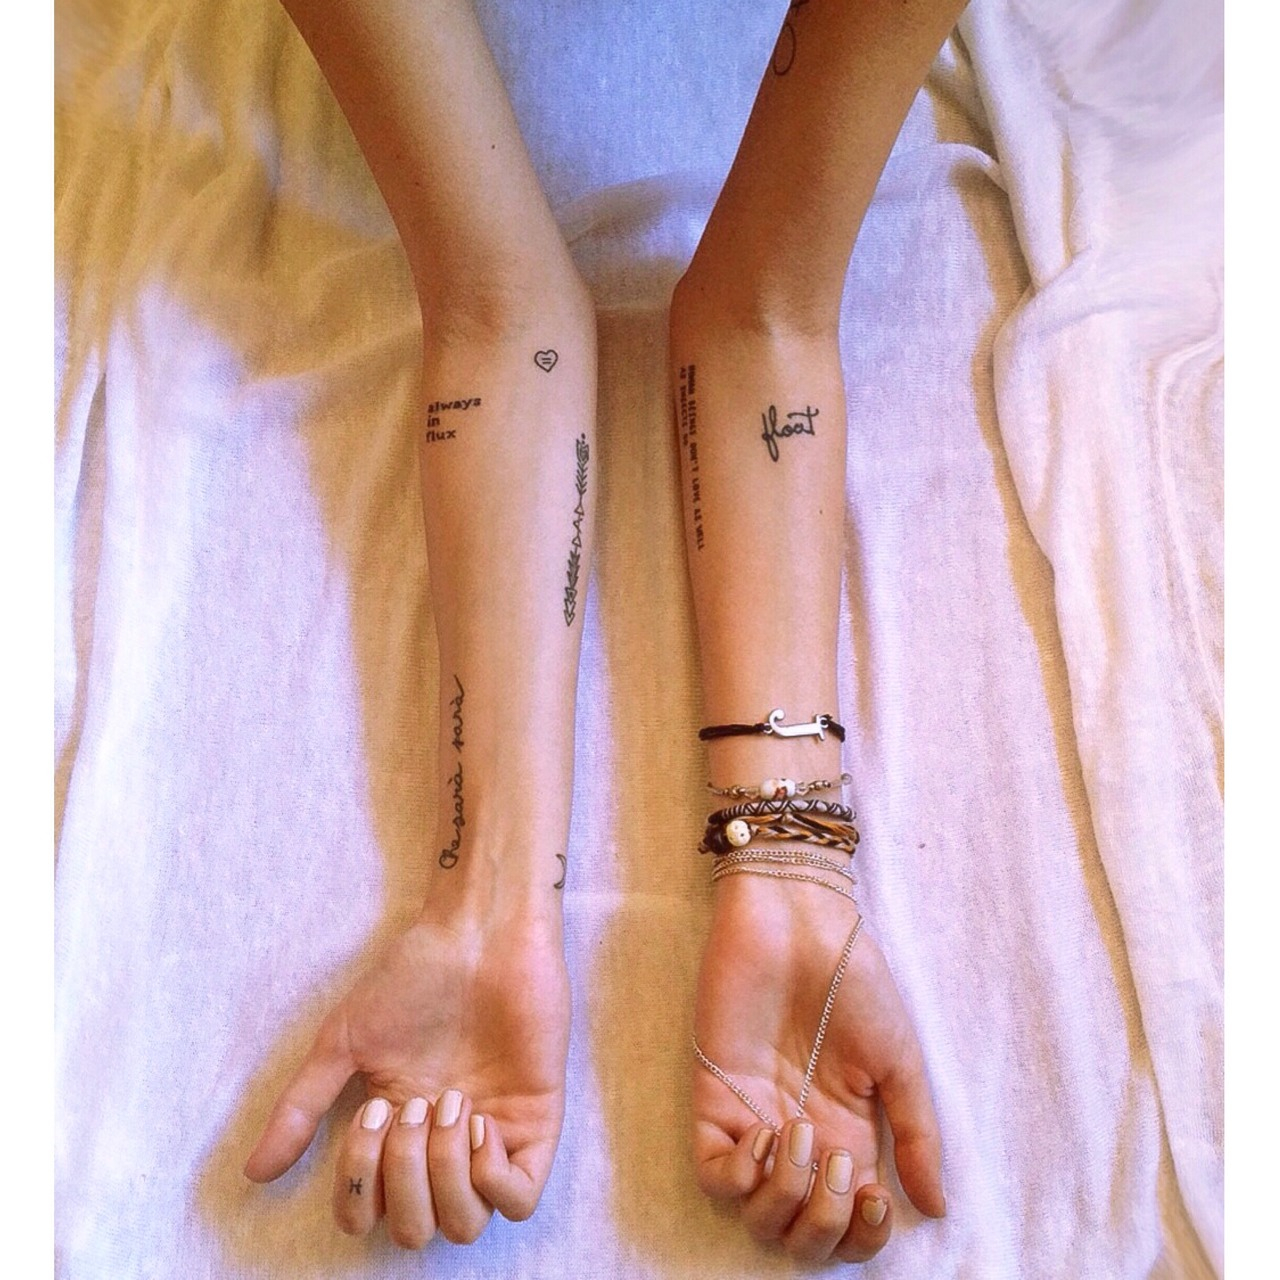 Tattoo Placement 40 Impossibly Brilliant Tattoo Placement Ideas For